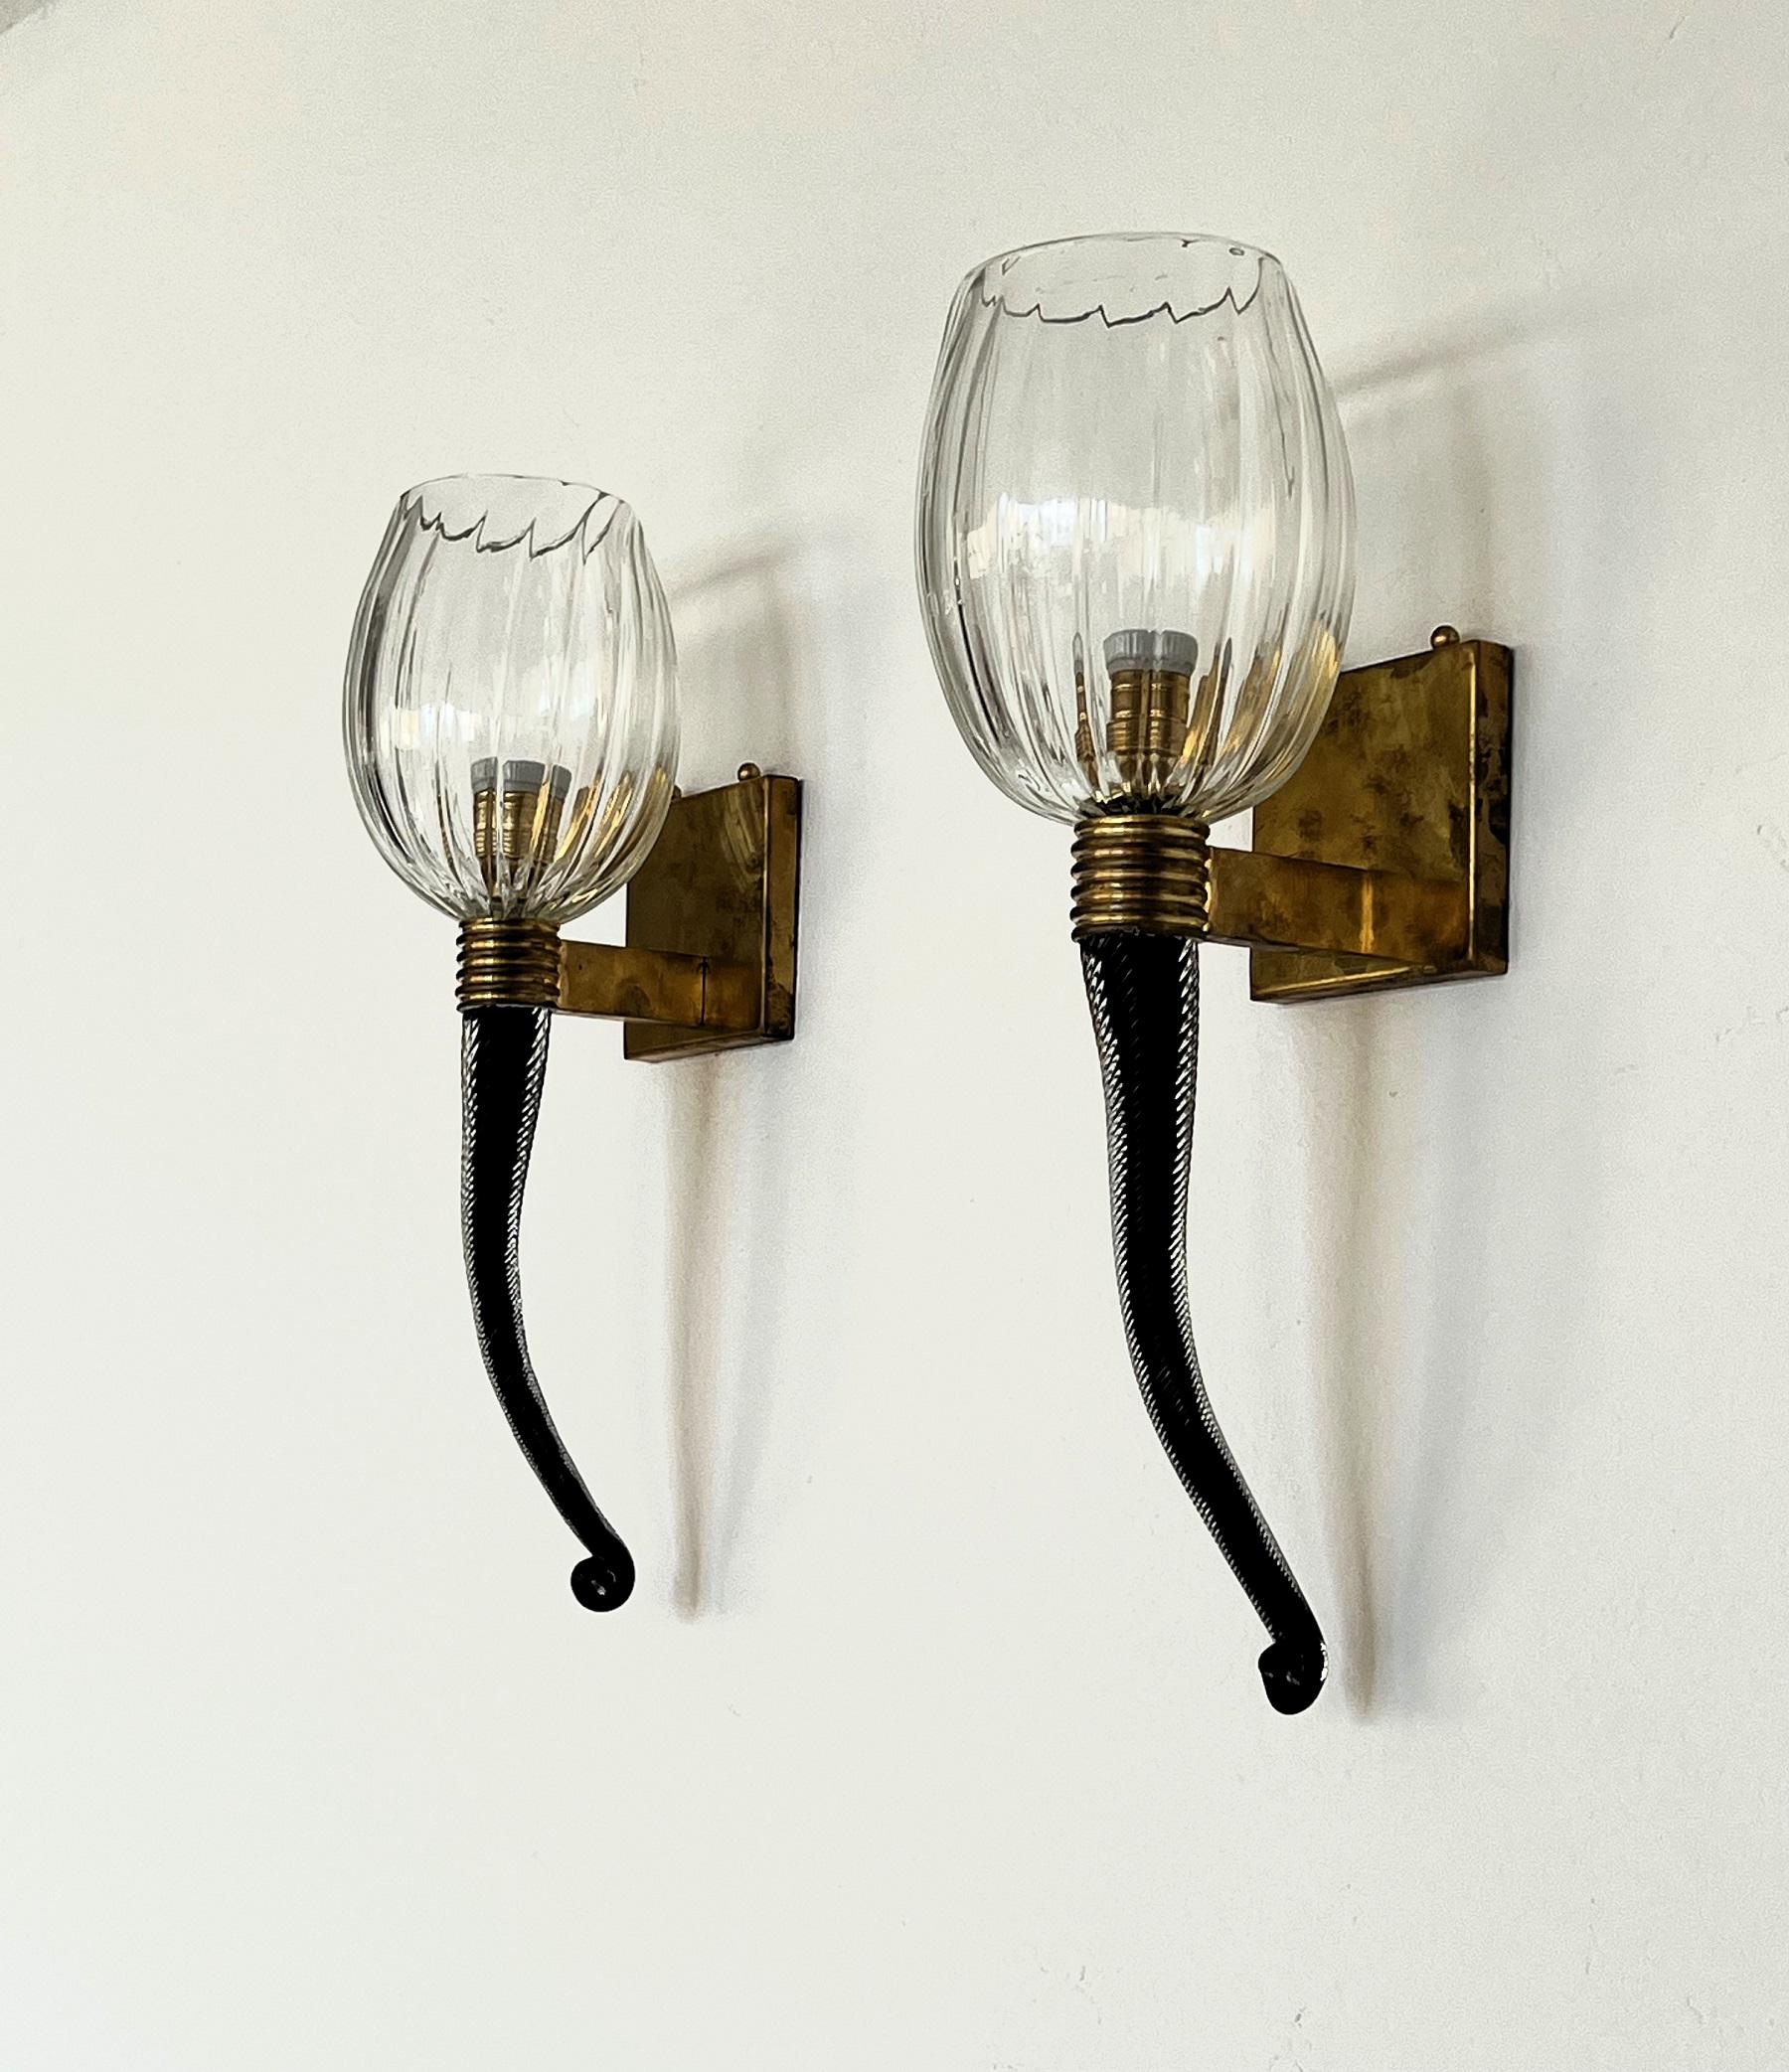 Brass Italian Large Murano Glass Wall Lights or Sconces in Barovier Toso Style, 1990s